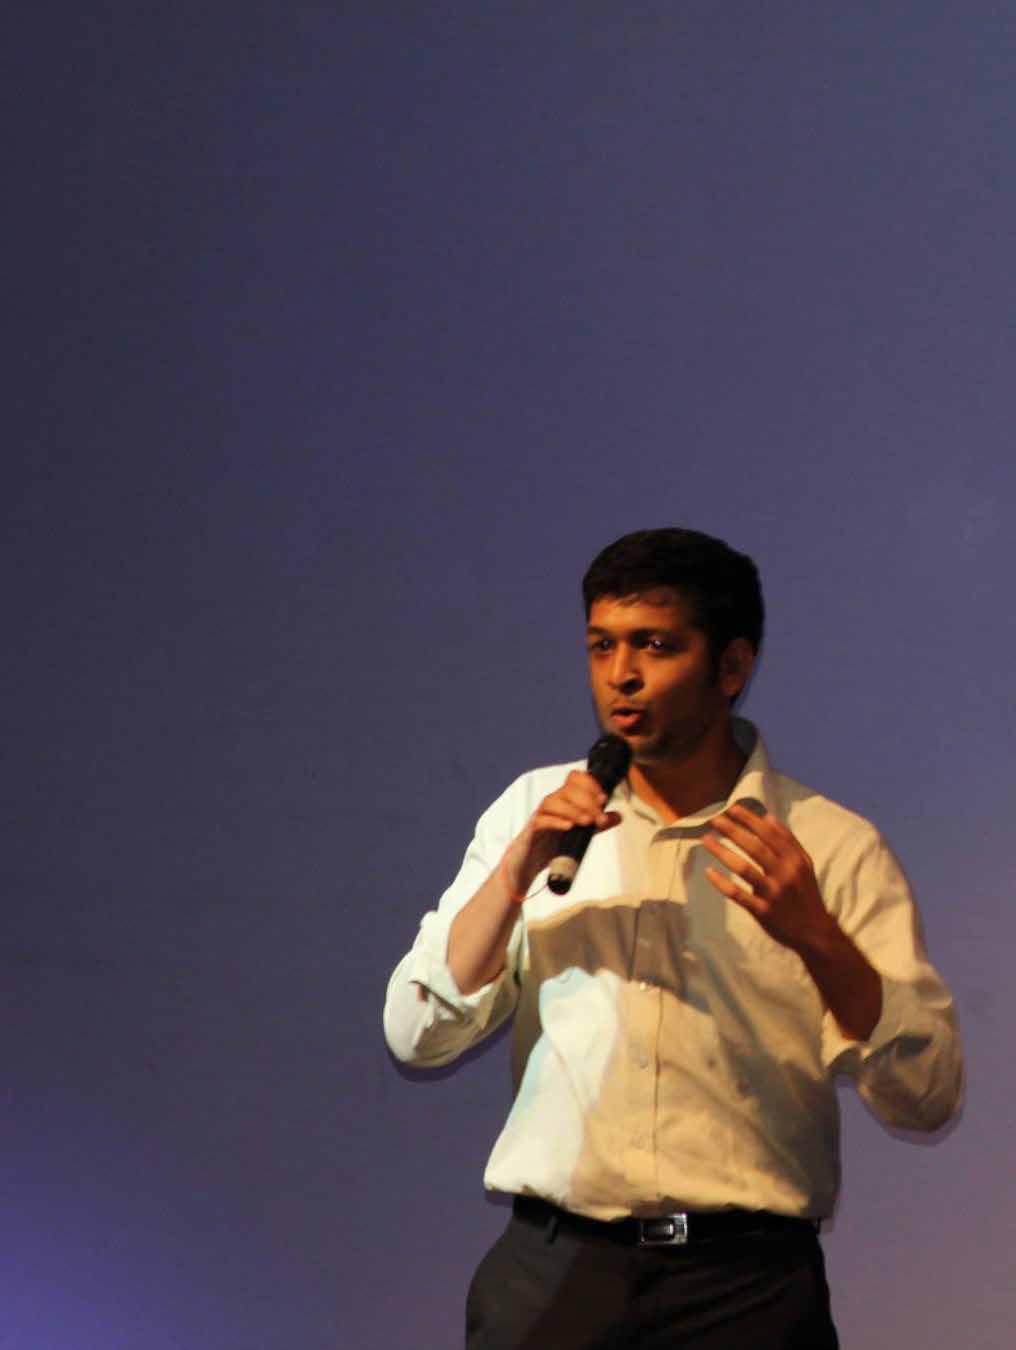 2 Aditya Kesanupalli Entrepreneur. 27. Telangana. Aditya studied B.Tech in Electronics and Communication from SRM Chennai and then worked in the oil and gas industry in Dubai.